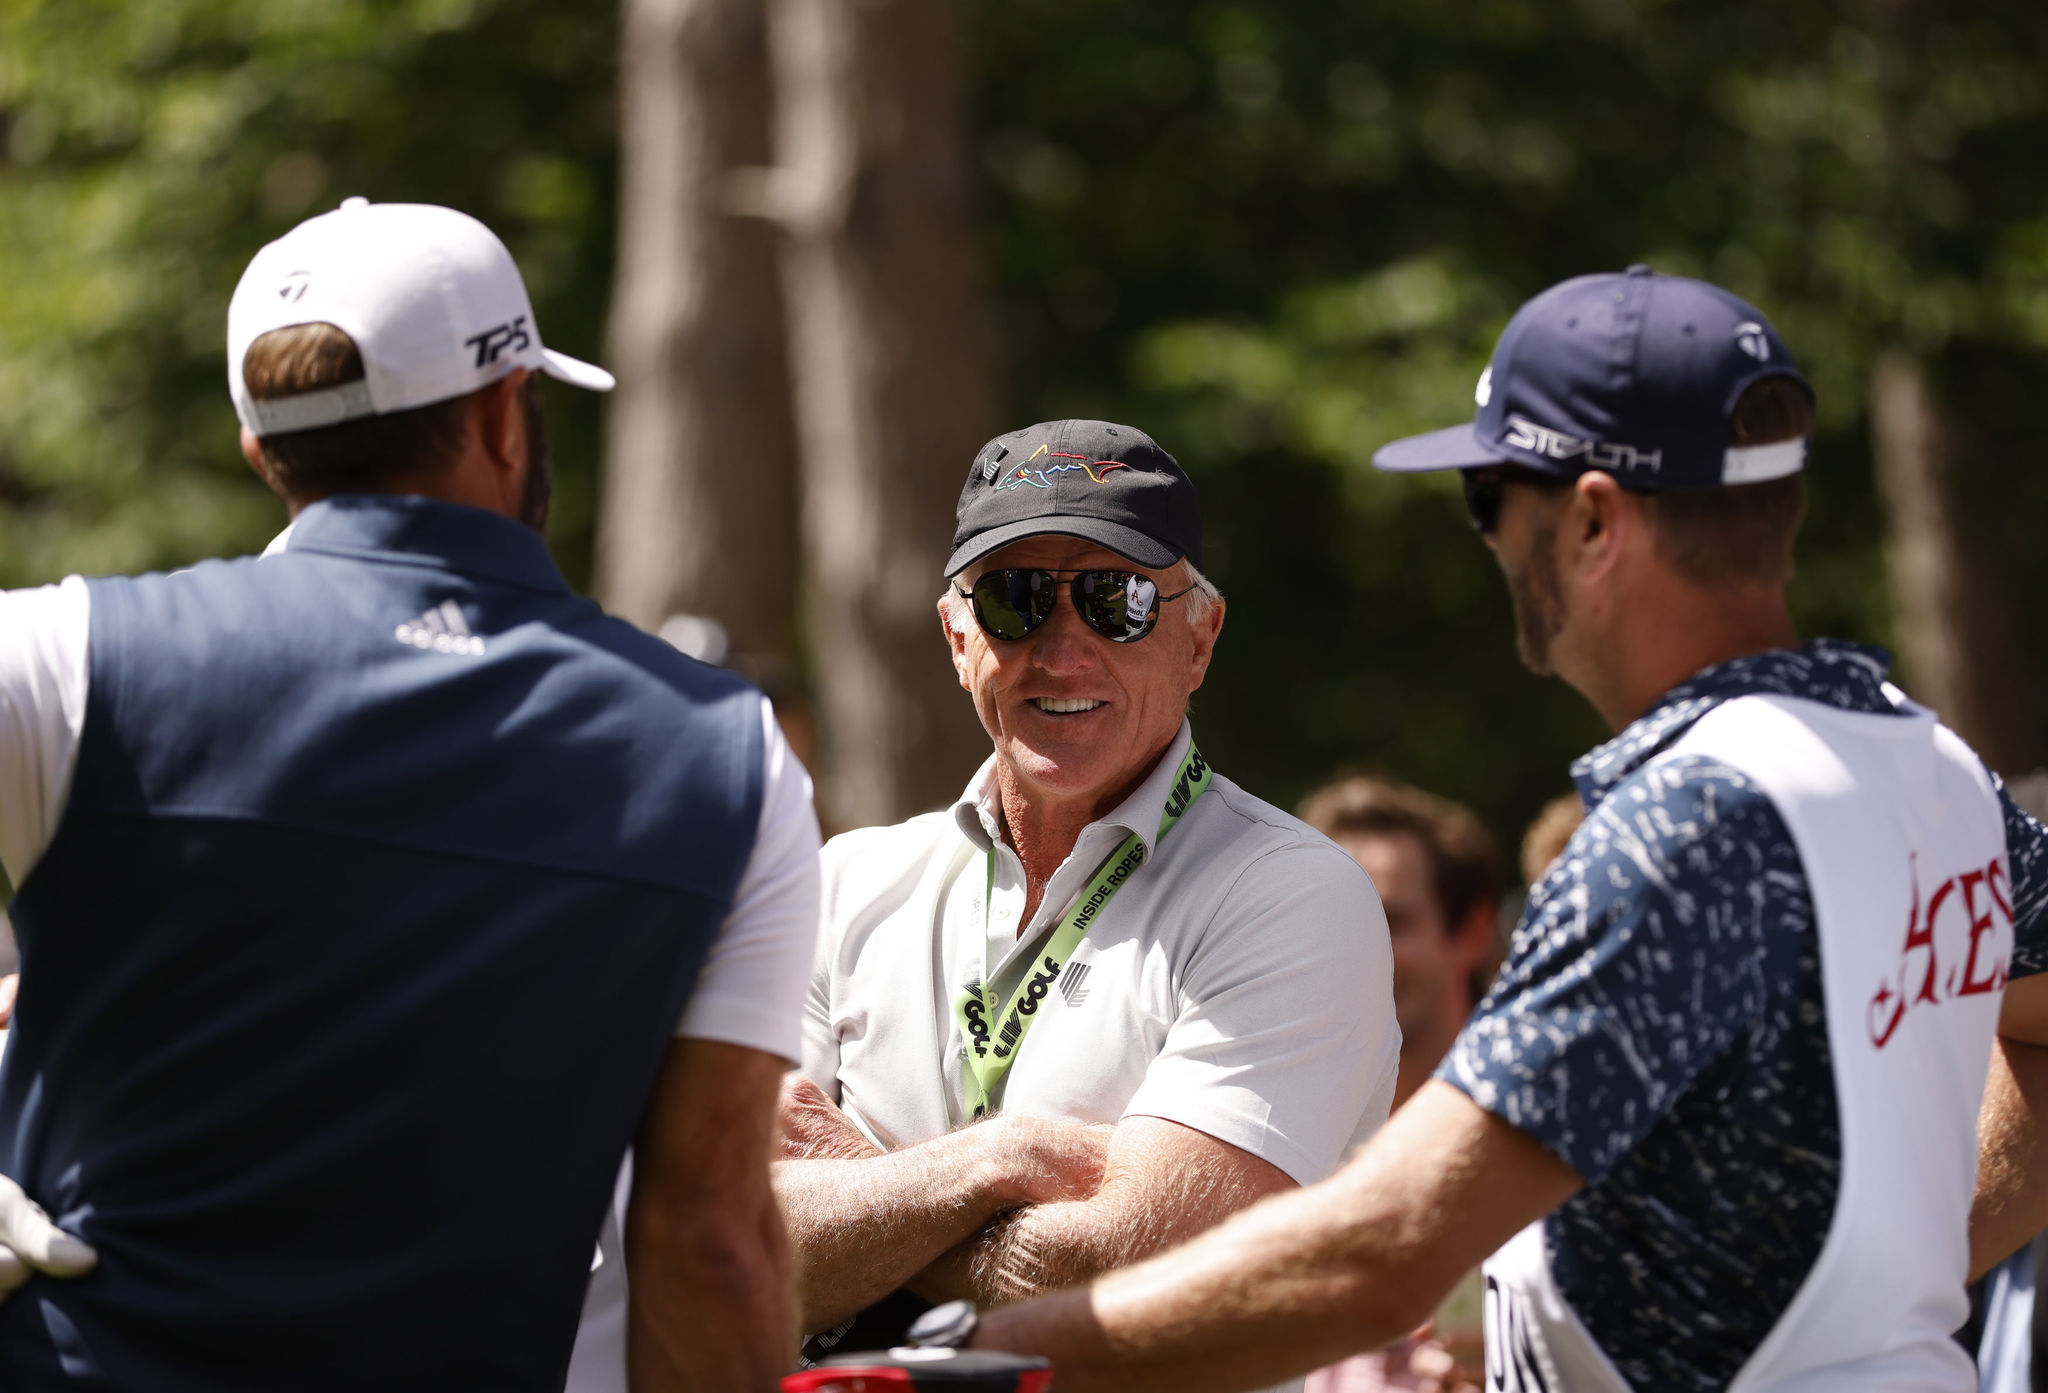 LIV Golf chief Greg Norman smiles as he stands on the course during day two of the LIV Golf Invitational Series.